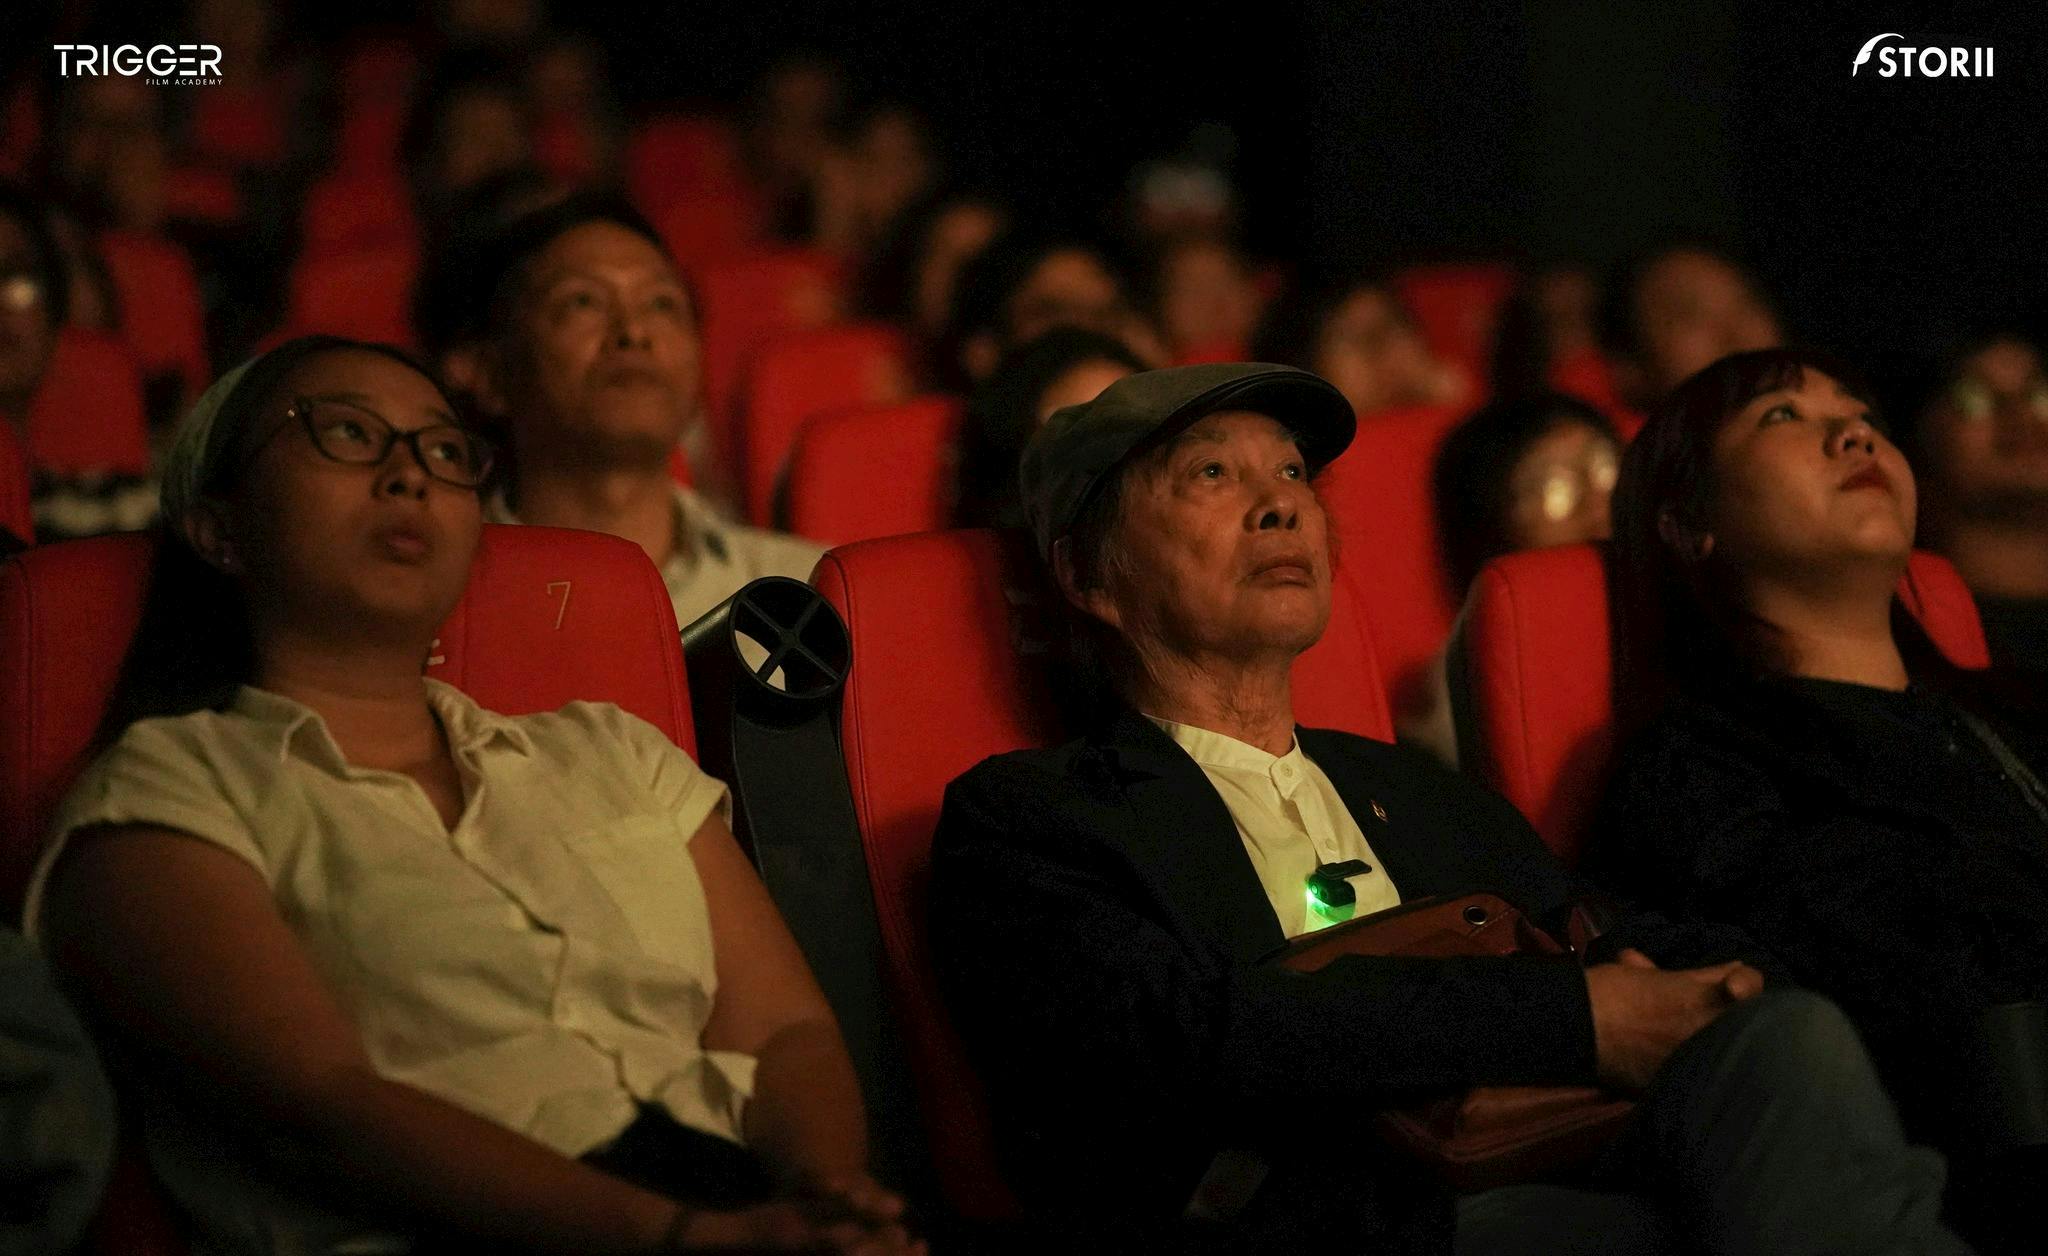 cinema person people crowd face head accessories glasses audience